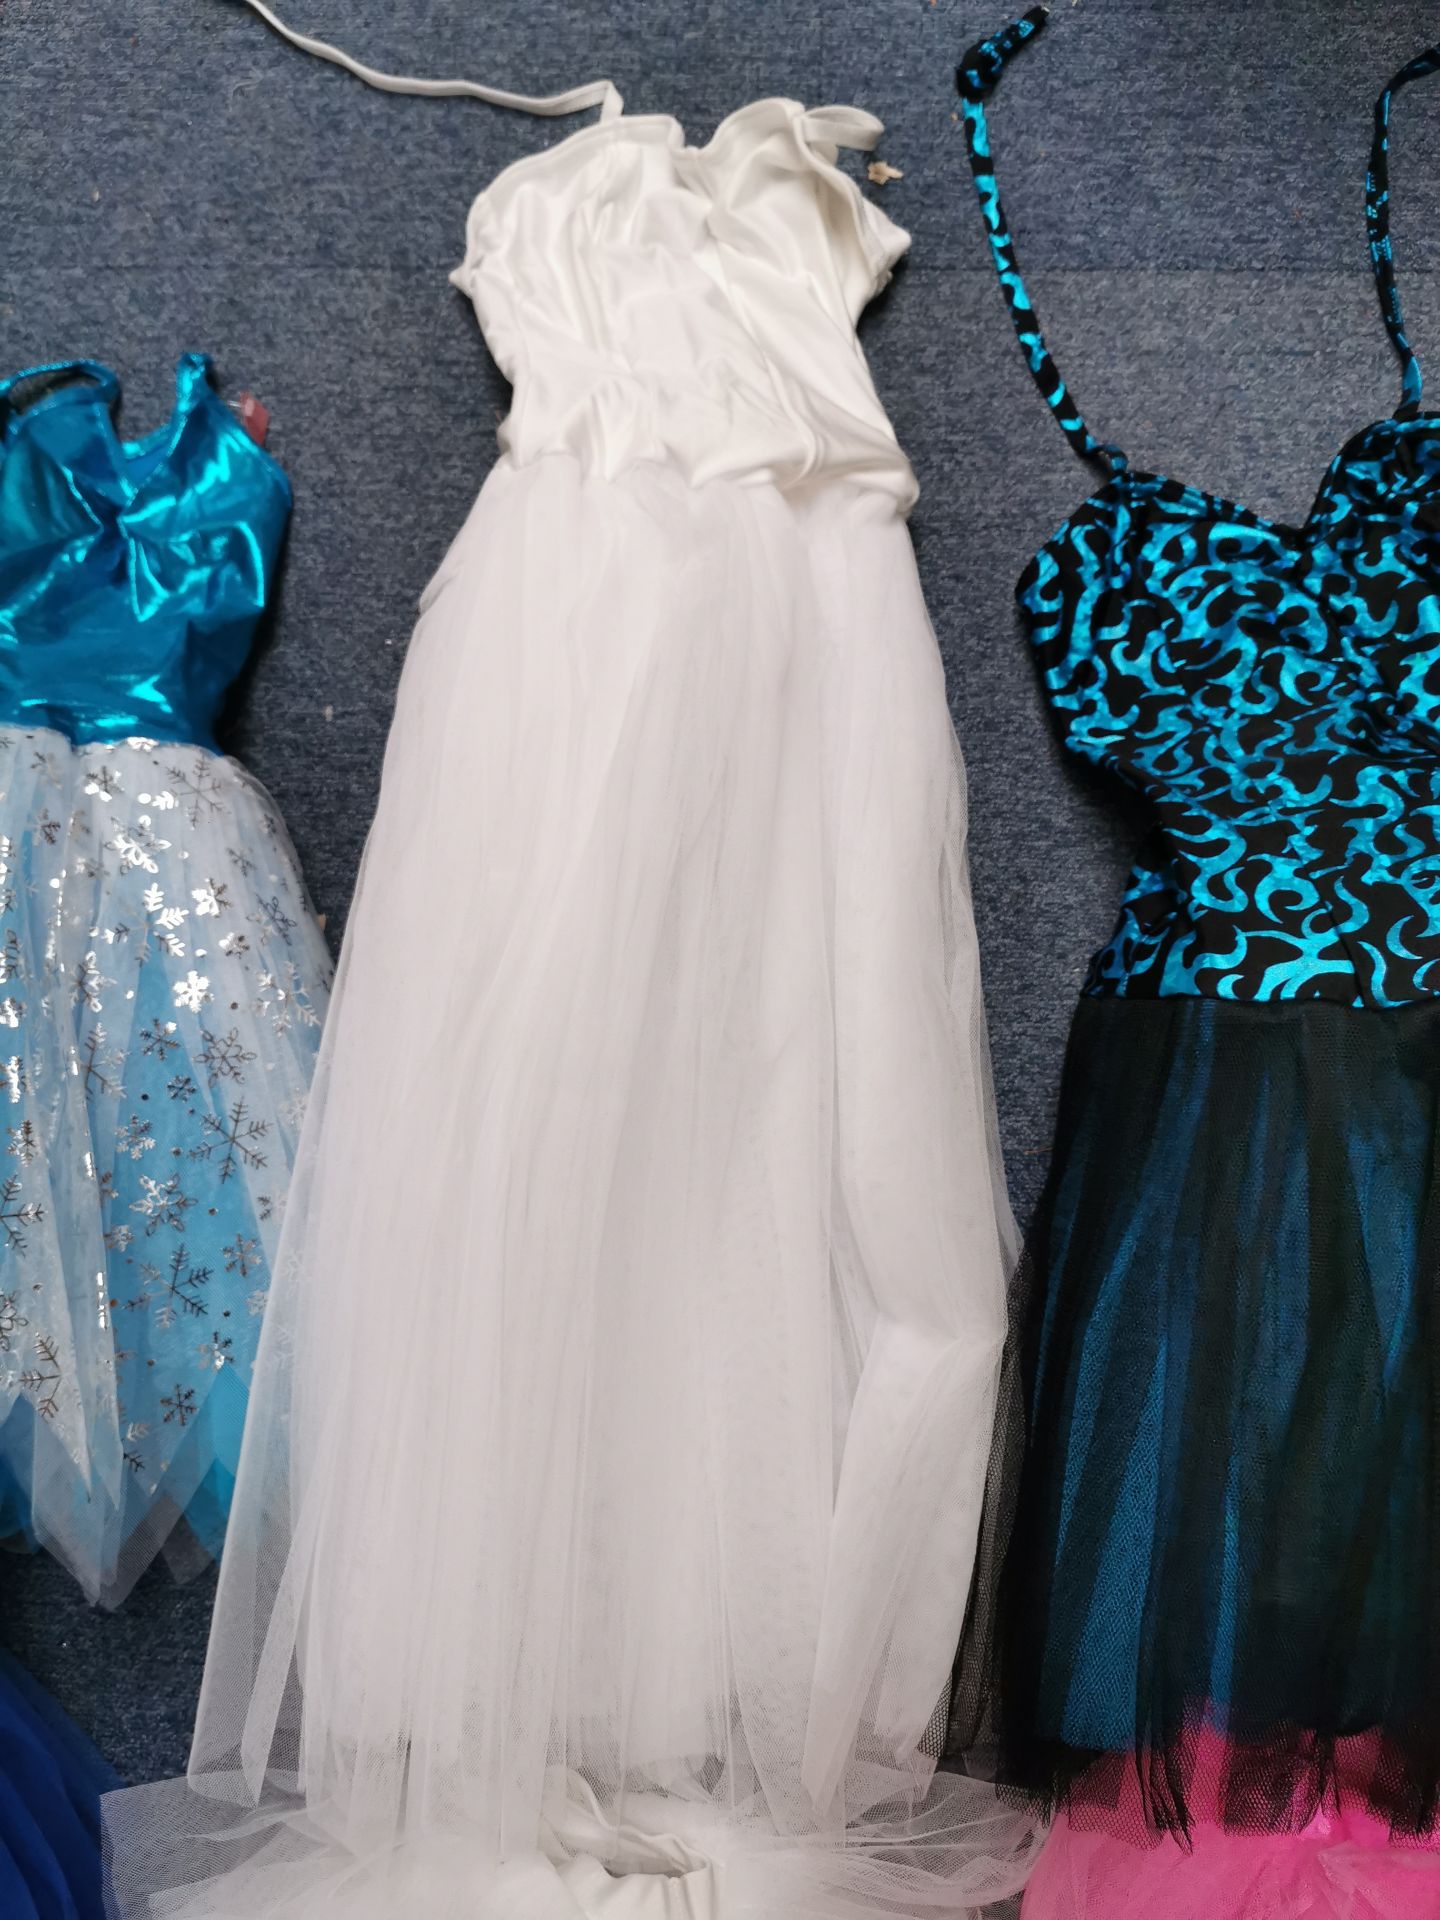 42+ Estimated tutu dresses and skirts various colours-sizesand designs - Image 3 of 6